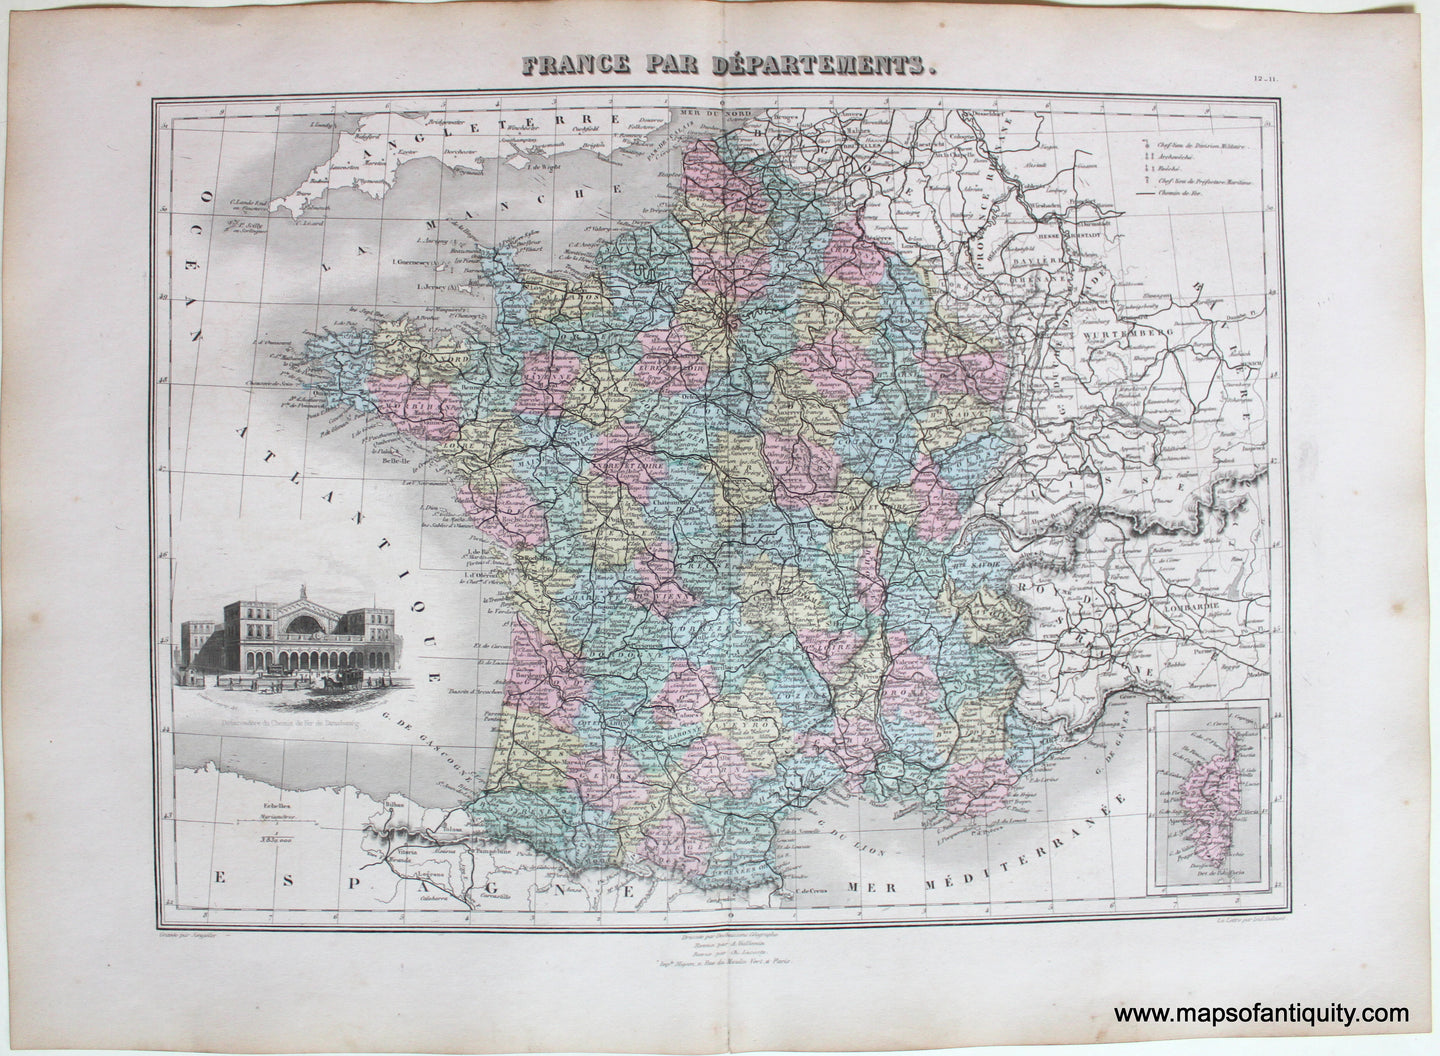 Antique-Hand-Colored-Map-France-Par-Departements.-1883-Migeon-France-1800s-19th-century-Maps-of-Antiquity